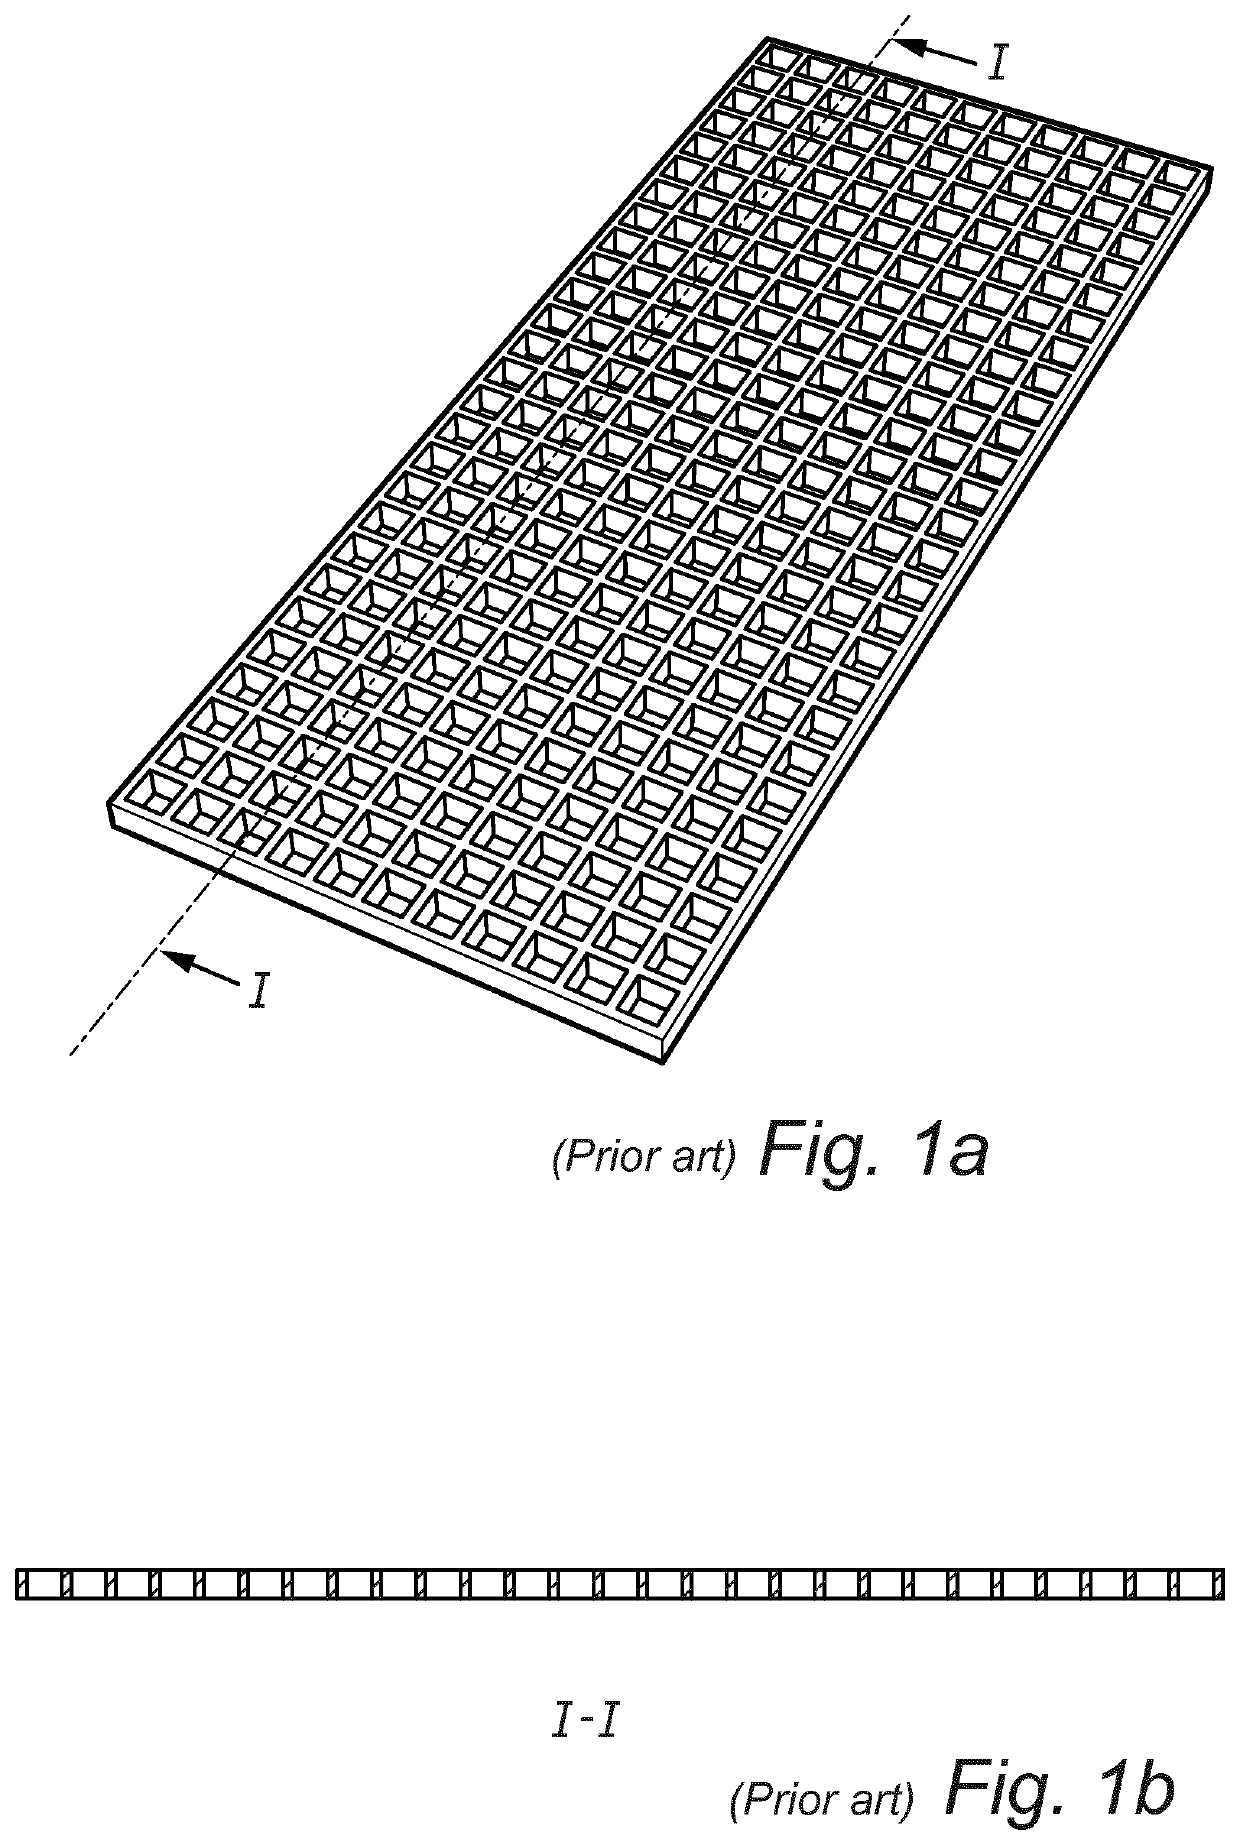 Filter panel with structures support grid and drum filter with said filter panel